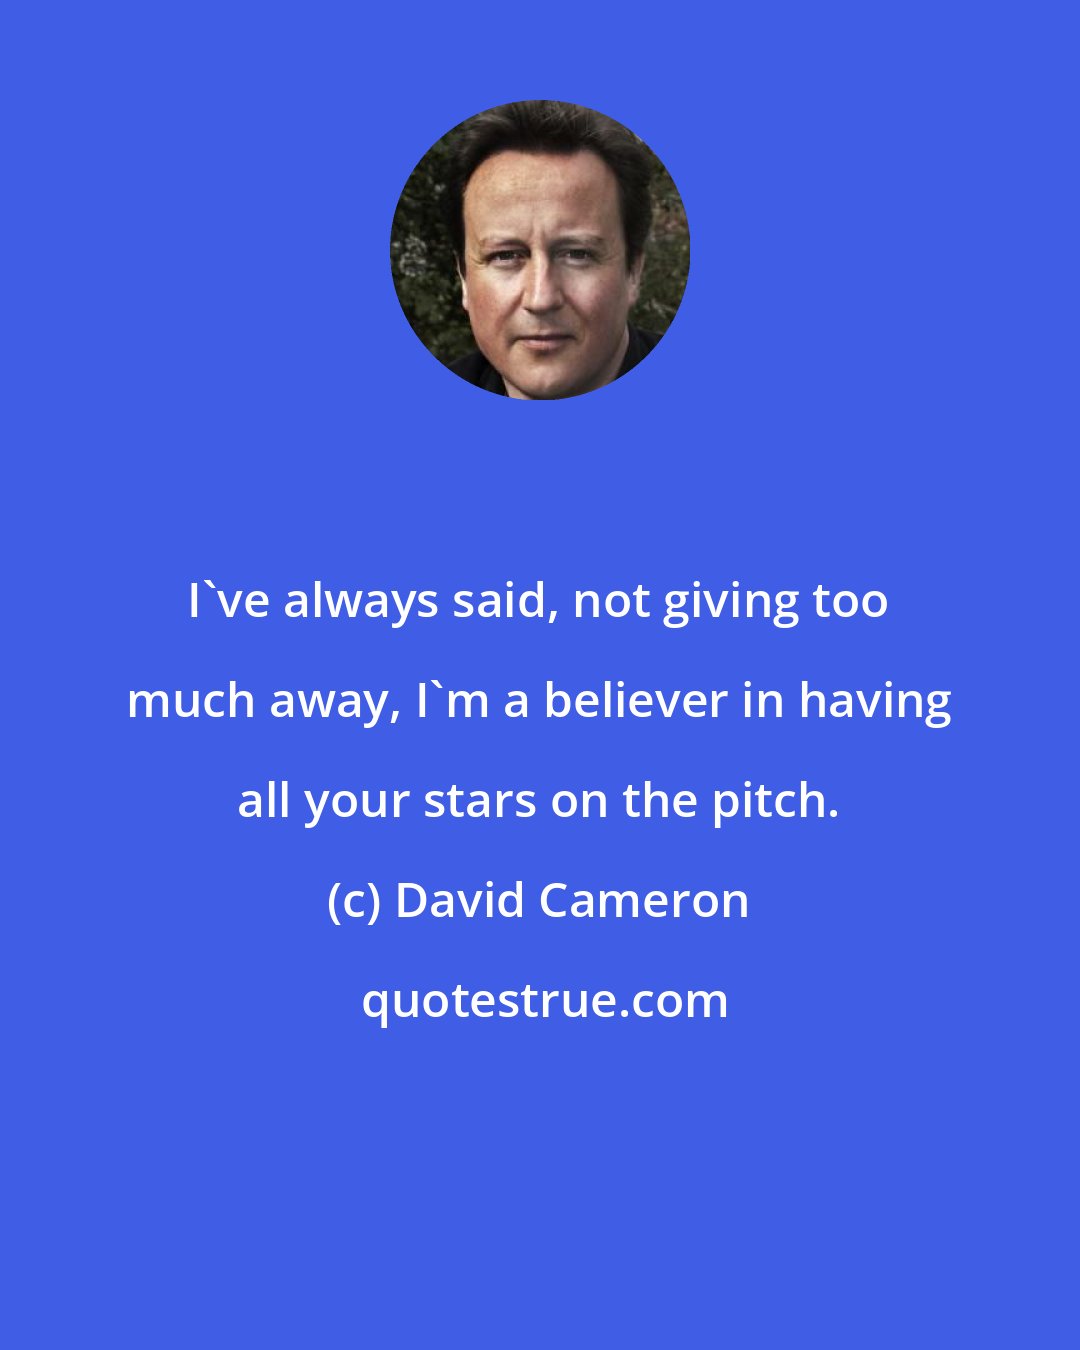 David Cameron: I've always said, not giving too much away, I'm a believer in having all your stars on the pitch.